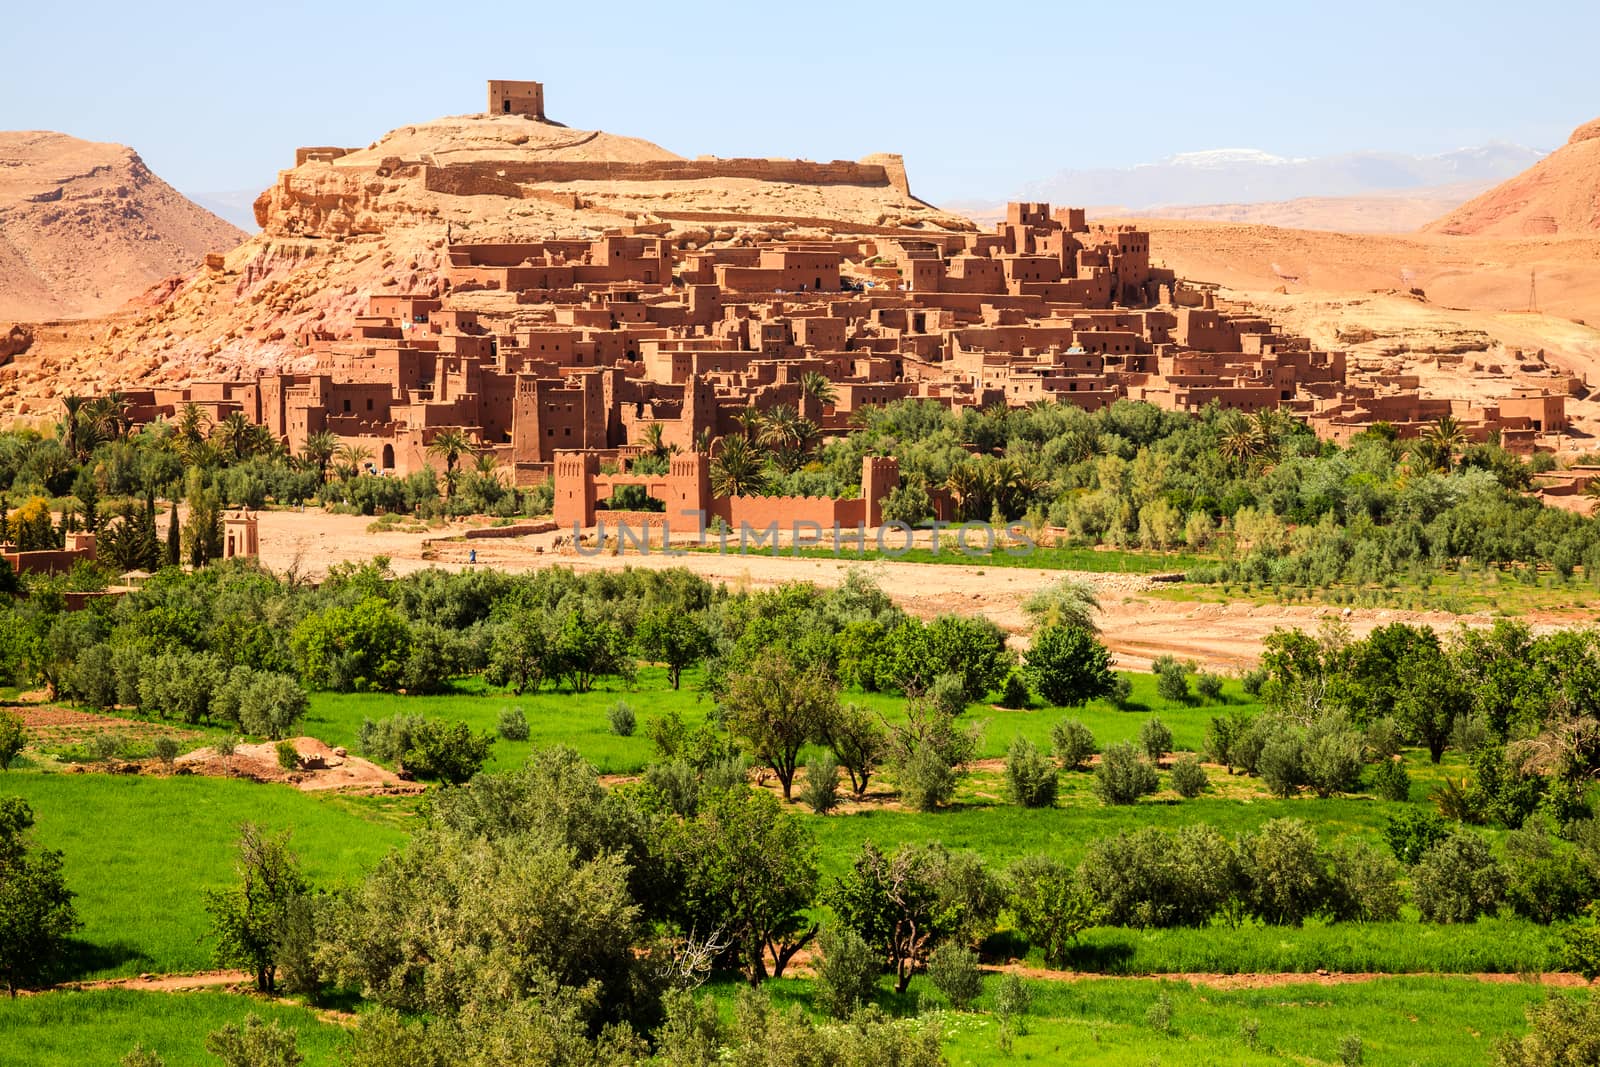 Kasbah of ait benhaddou in morocco